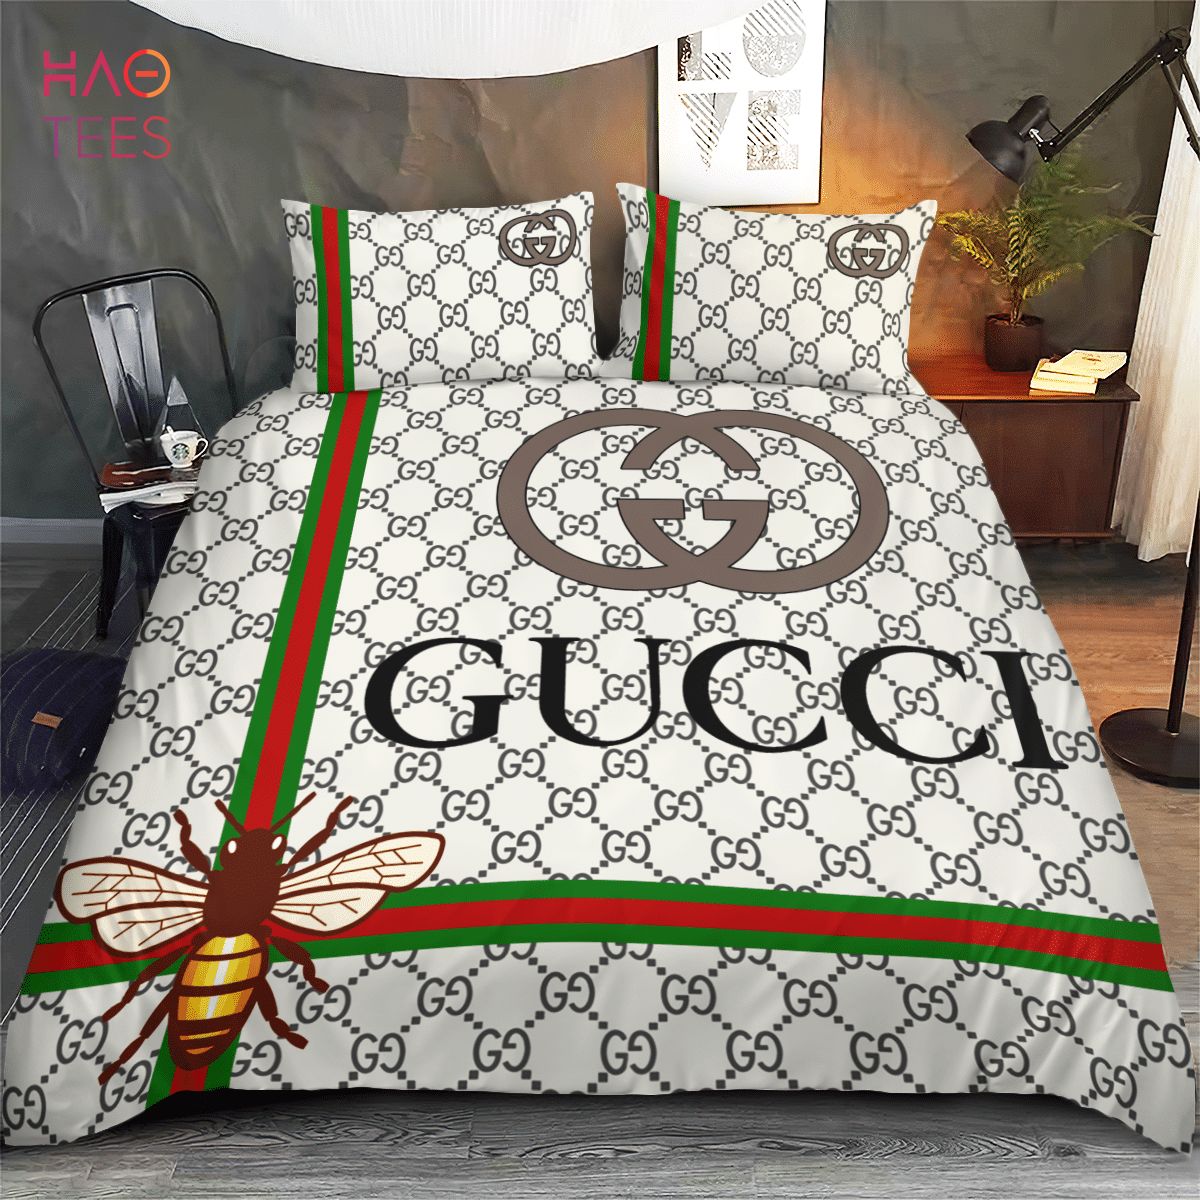 GC Limited Edition Full Bedding Set